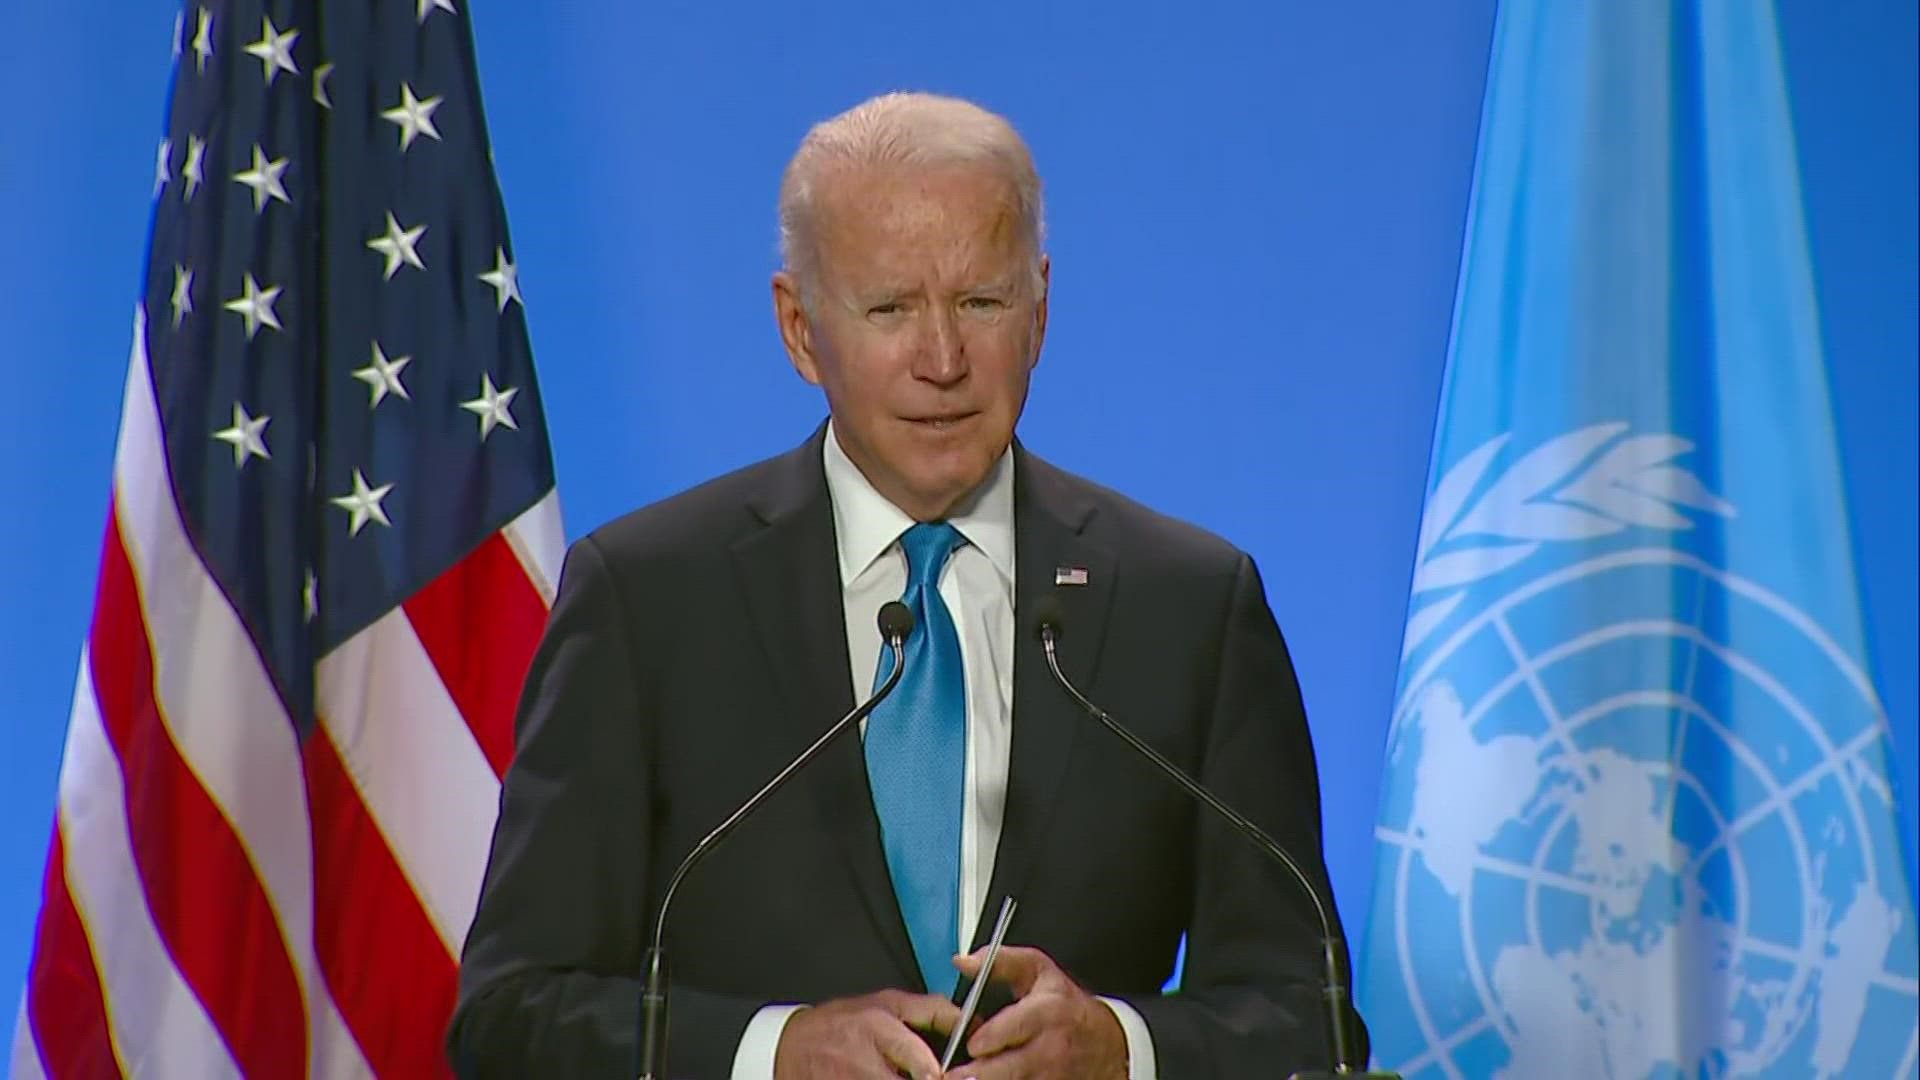 President Biden held a press conference Tuesday as he wrapped up a two-day appearance at a United Nations climate summit.